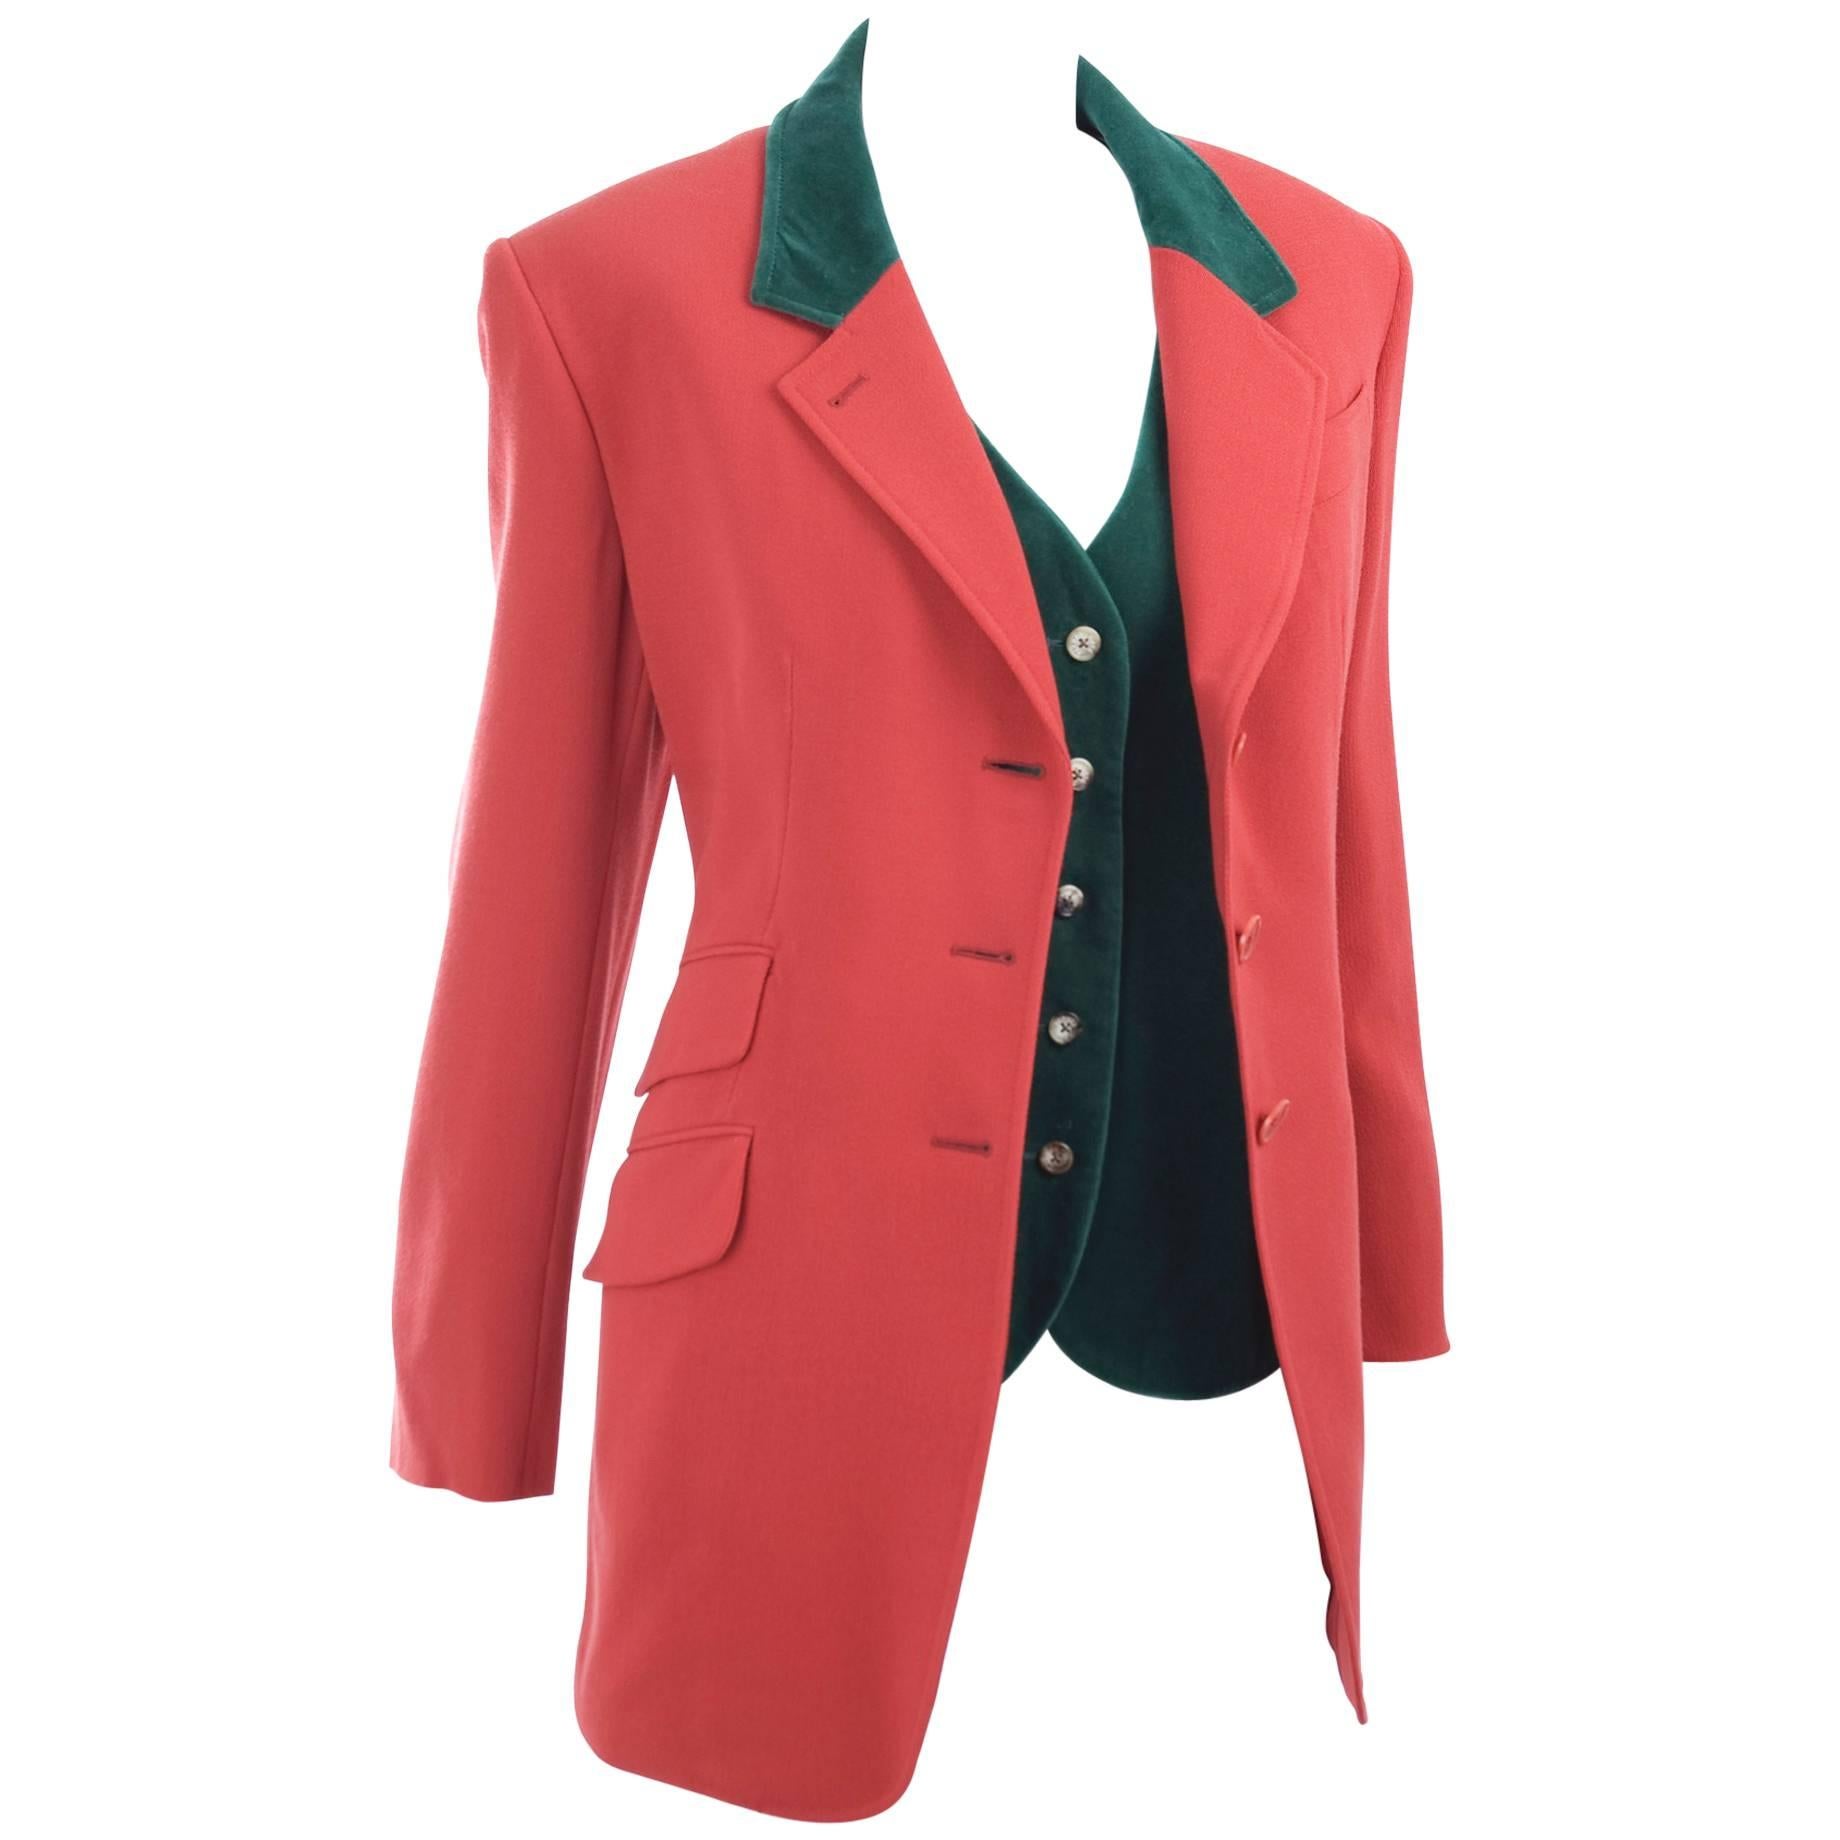 Vintage 80s Hermes Riding Style Jacket and Vest in Red and Green For Sale